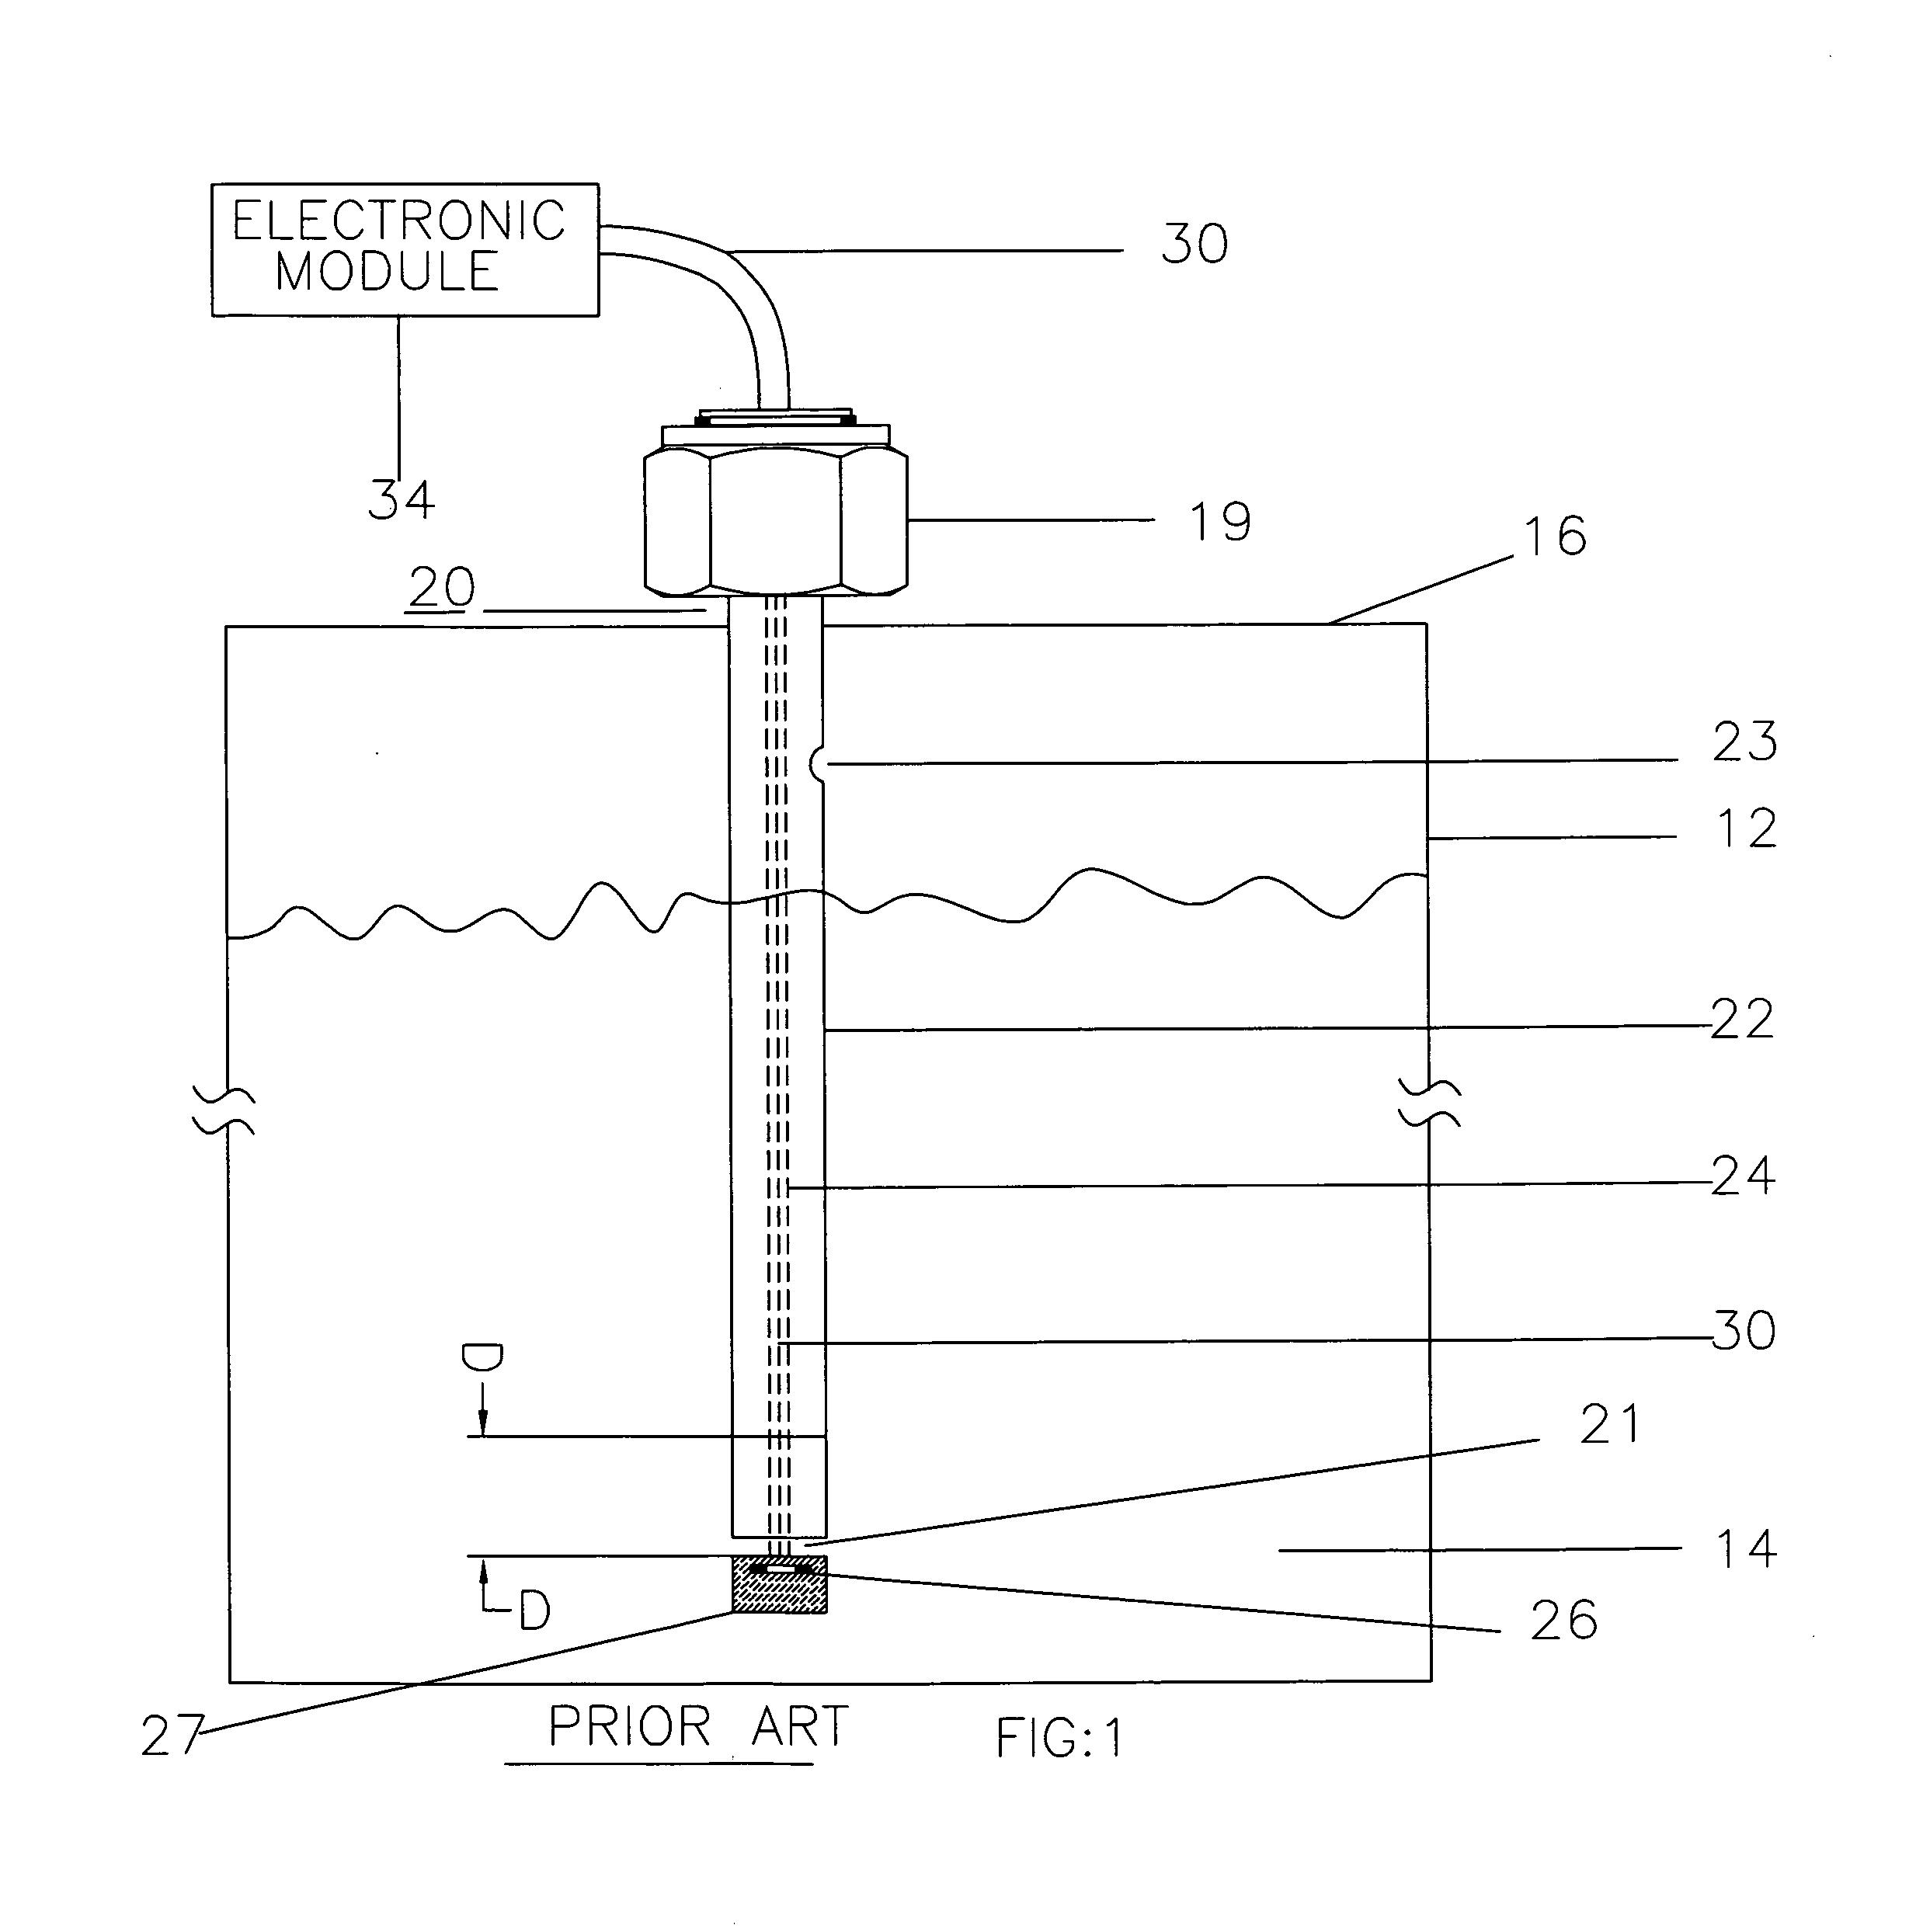 Bottom up contact type ultrasonic continuous level sensor